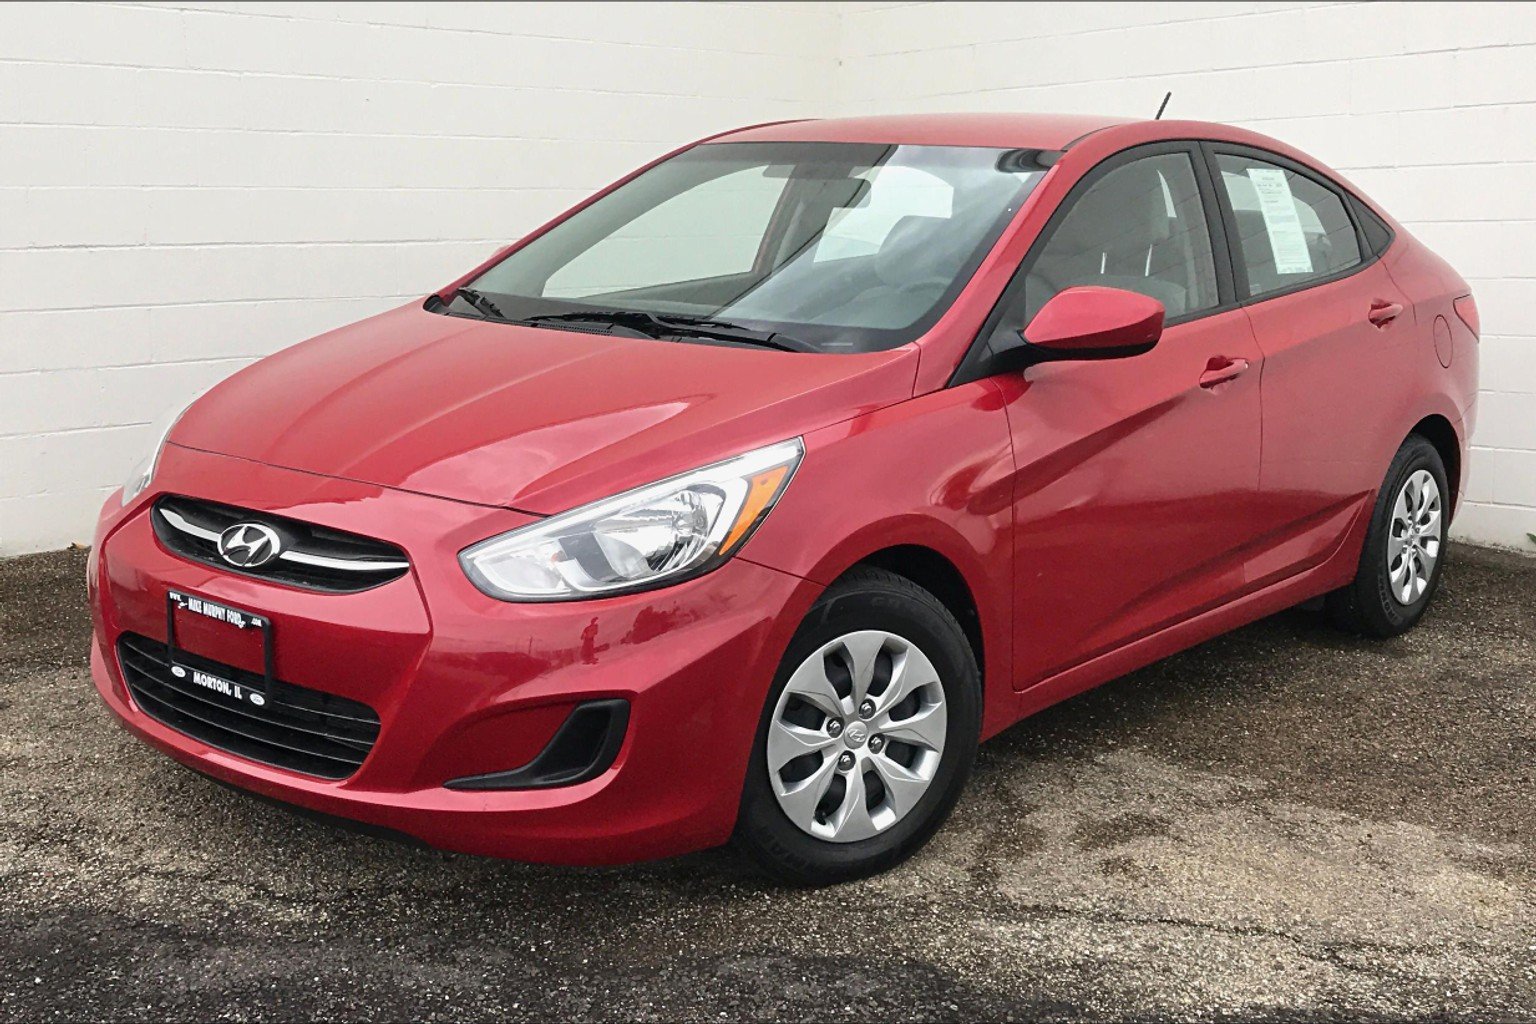 Pre-Owned 2016 Hyundai Accent SE 4dr Car in Morton #089594 | Mike ...